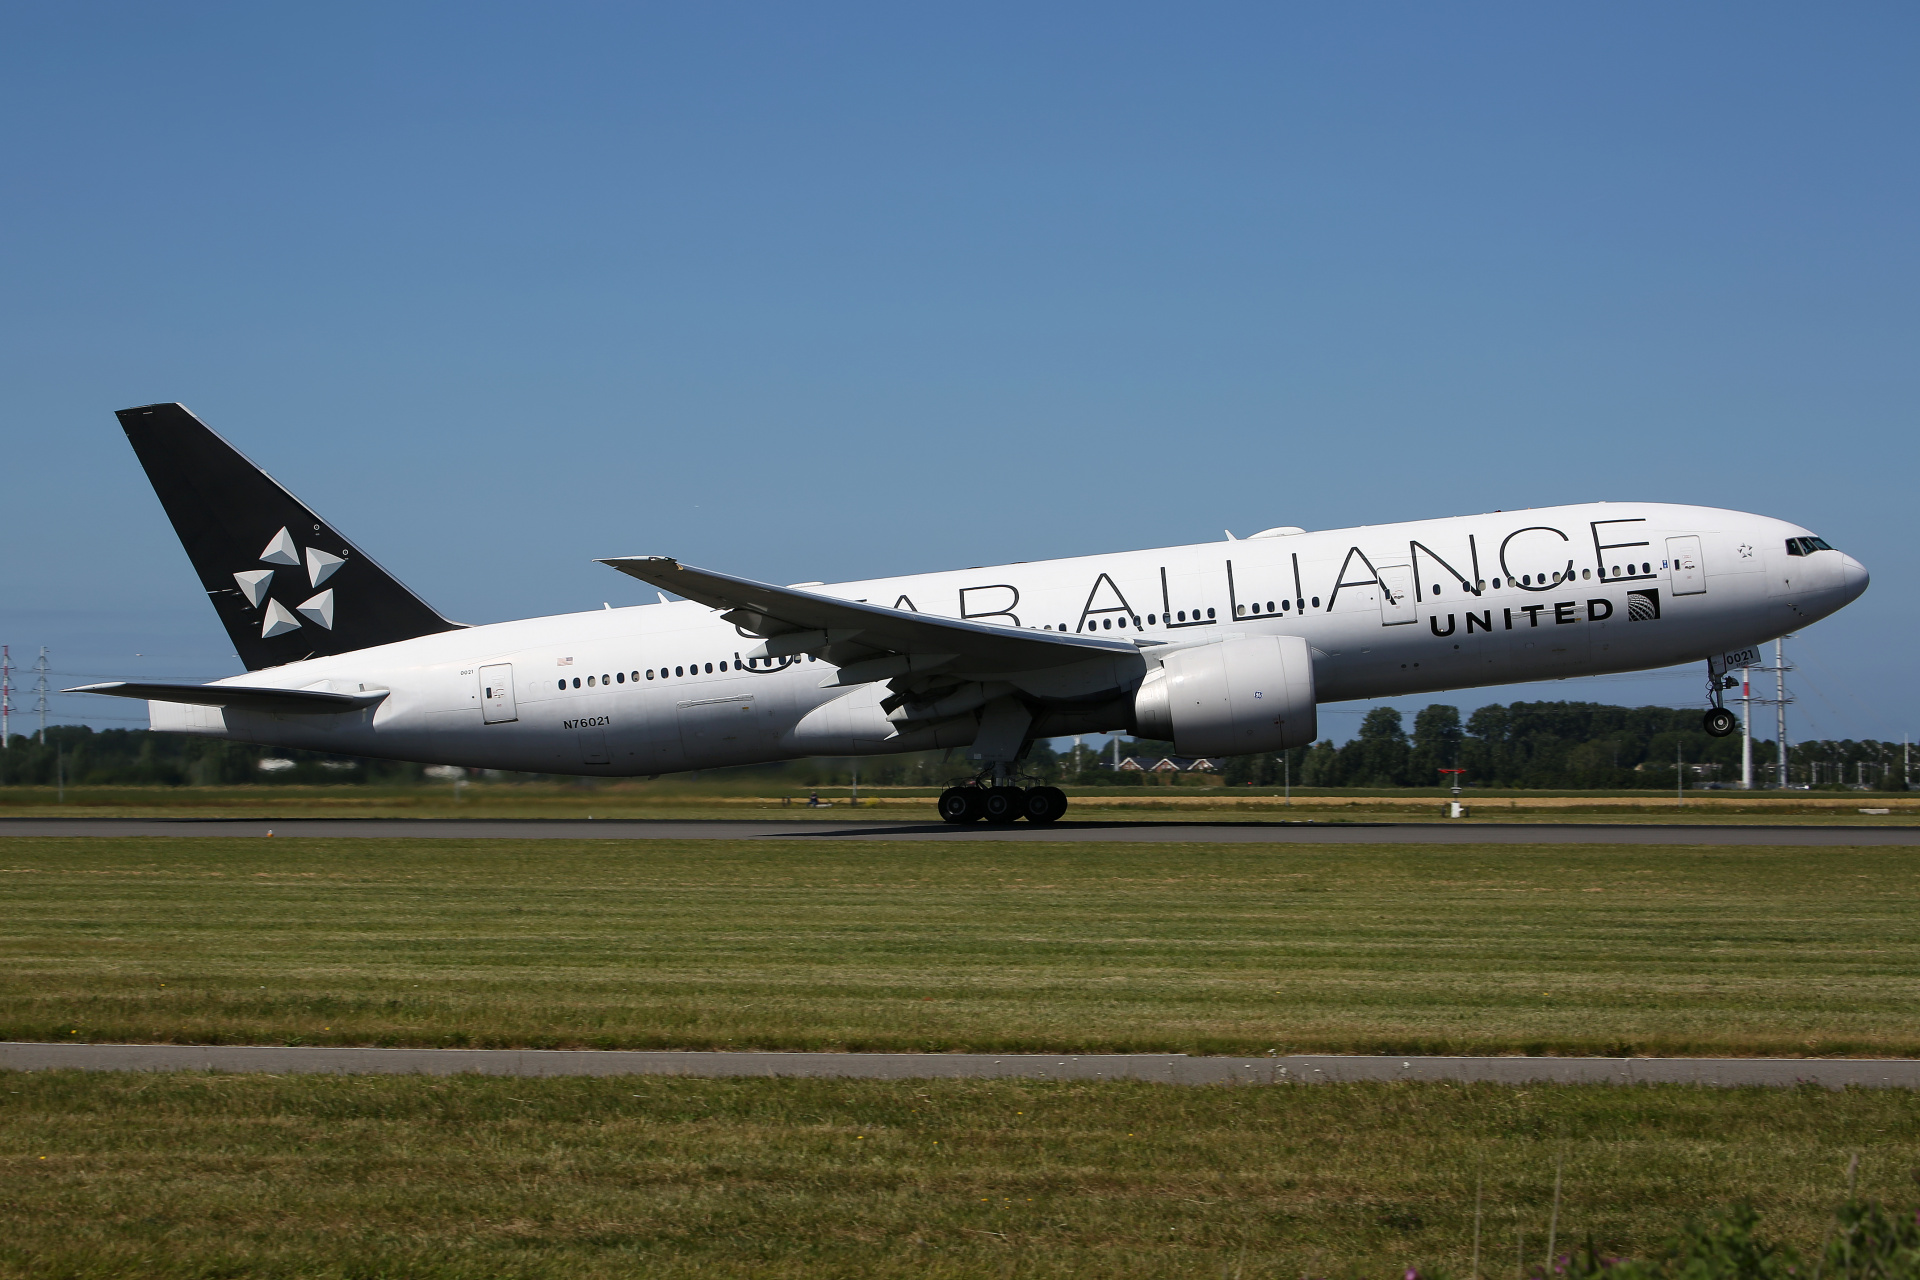 N76021 (Star Alliance livery) (Aircraft » Schiphol Spotting » Boeing 777-200/-ER » United Airlines)